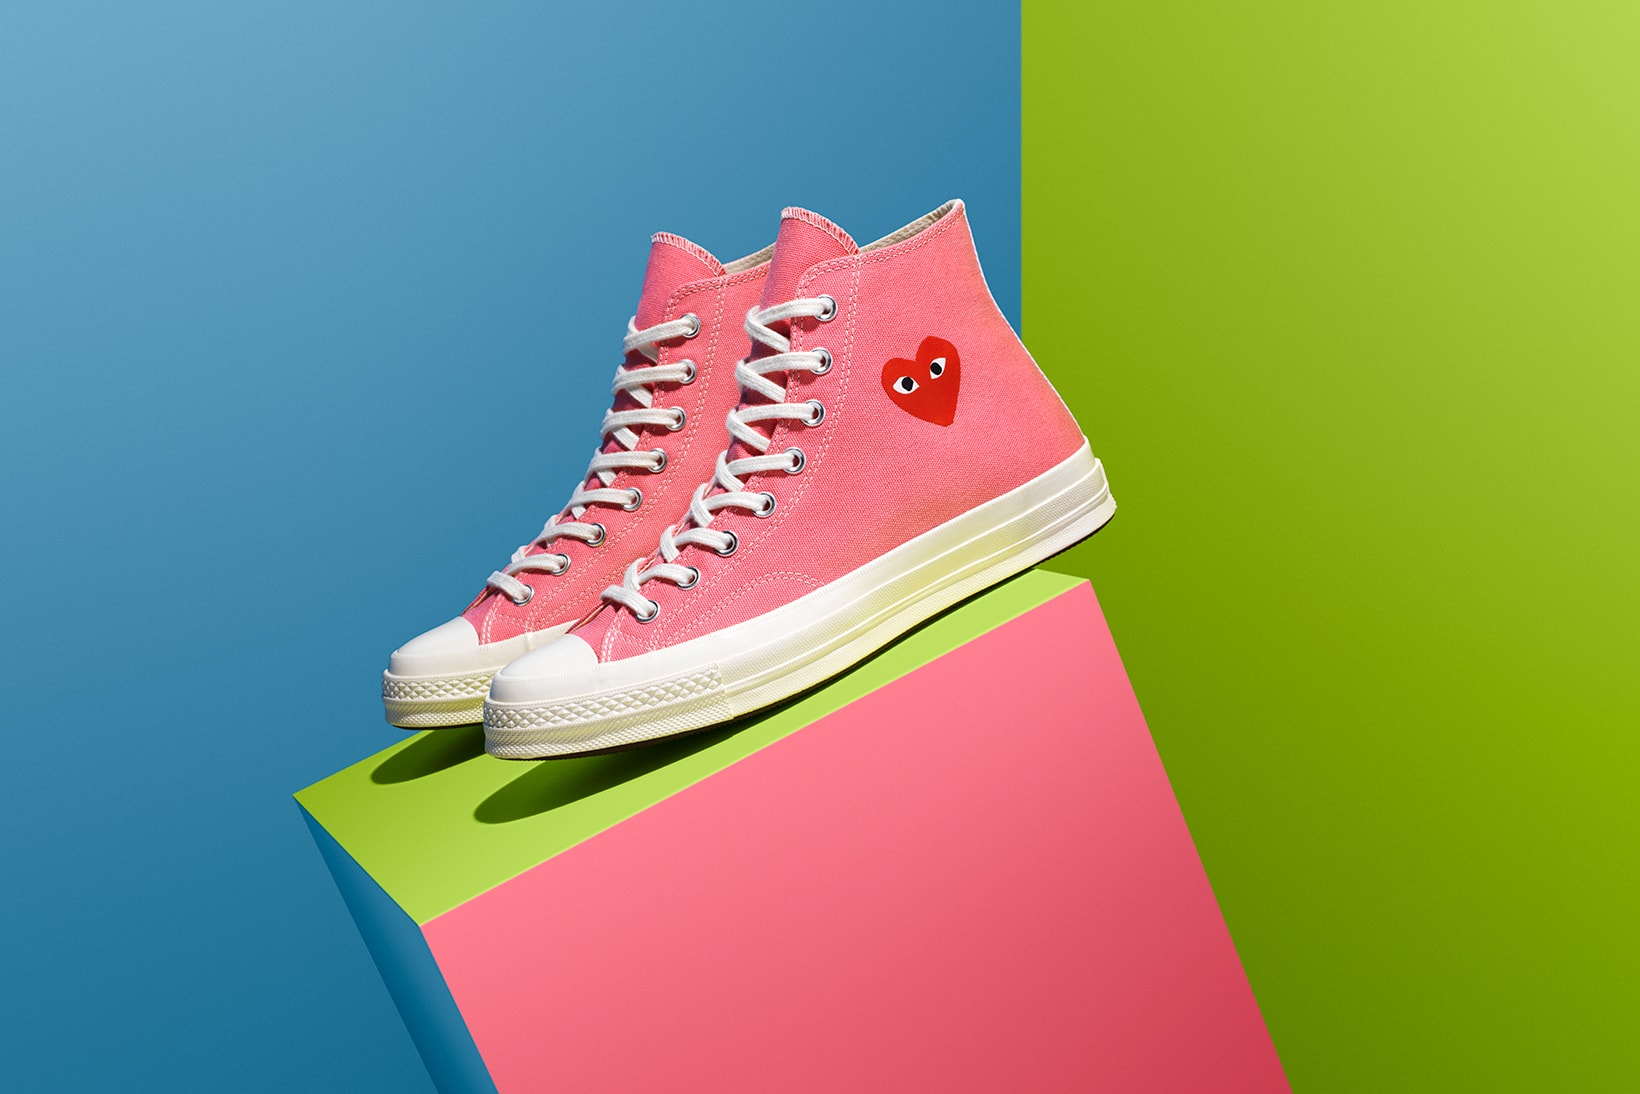 converse comme des garcons play chuck 70 high ox collaboration sneakers pink blue green hearts red sneakerhead shoes footwear